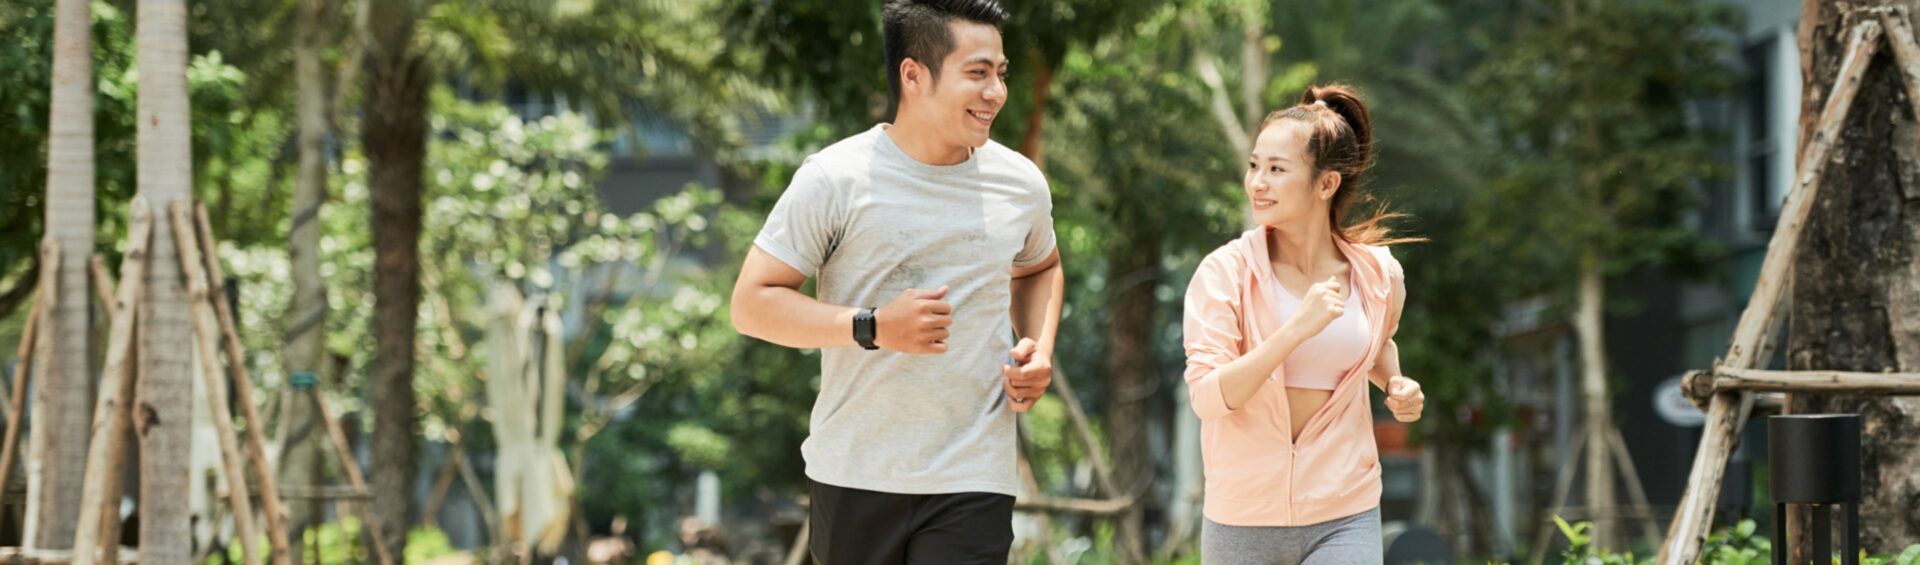 Healthy couple jogging in the park